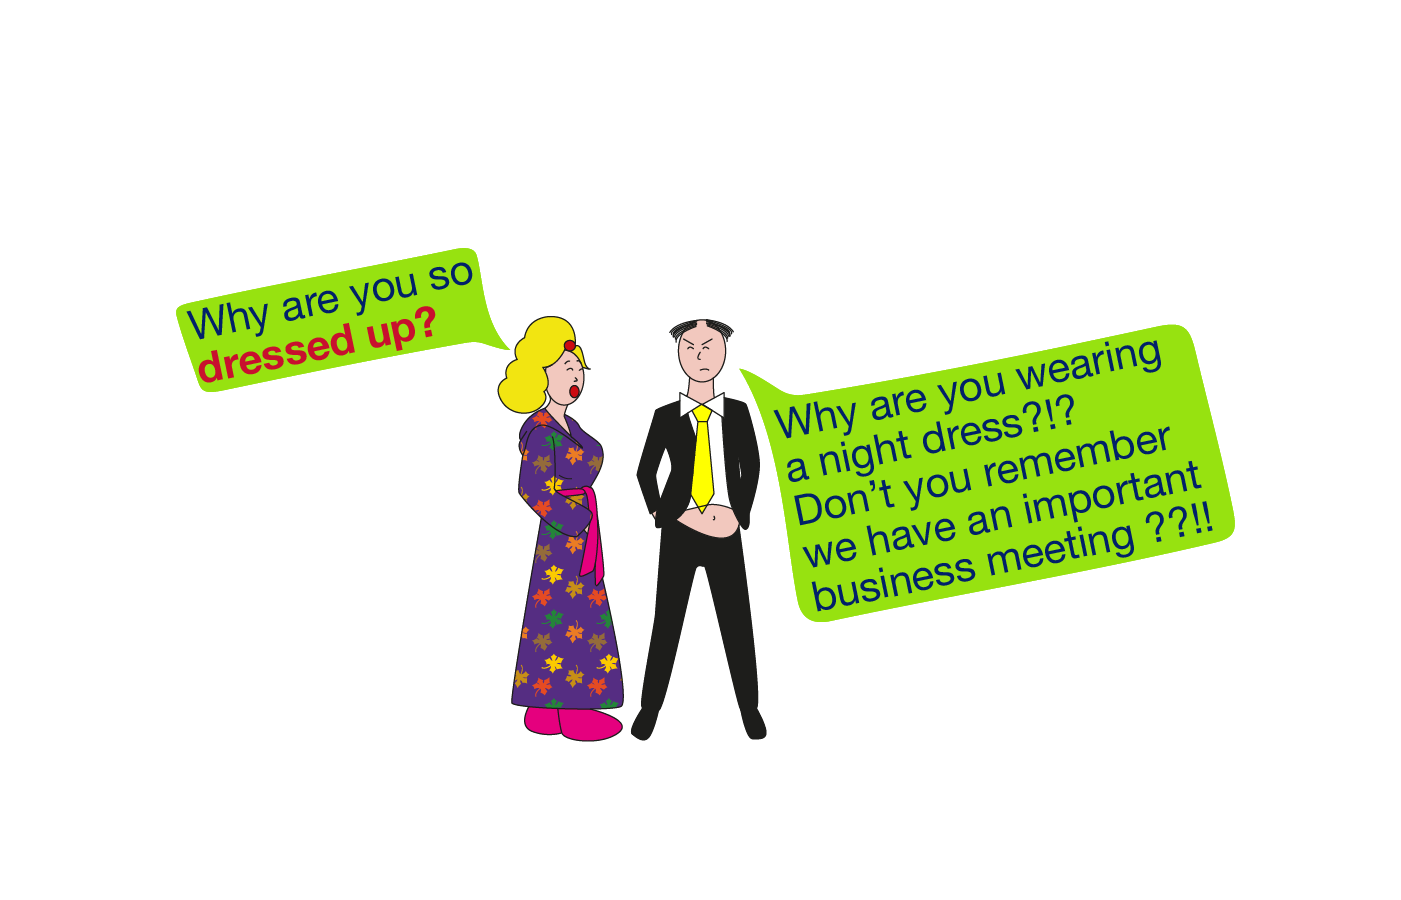 dress up phrasal verb meaning